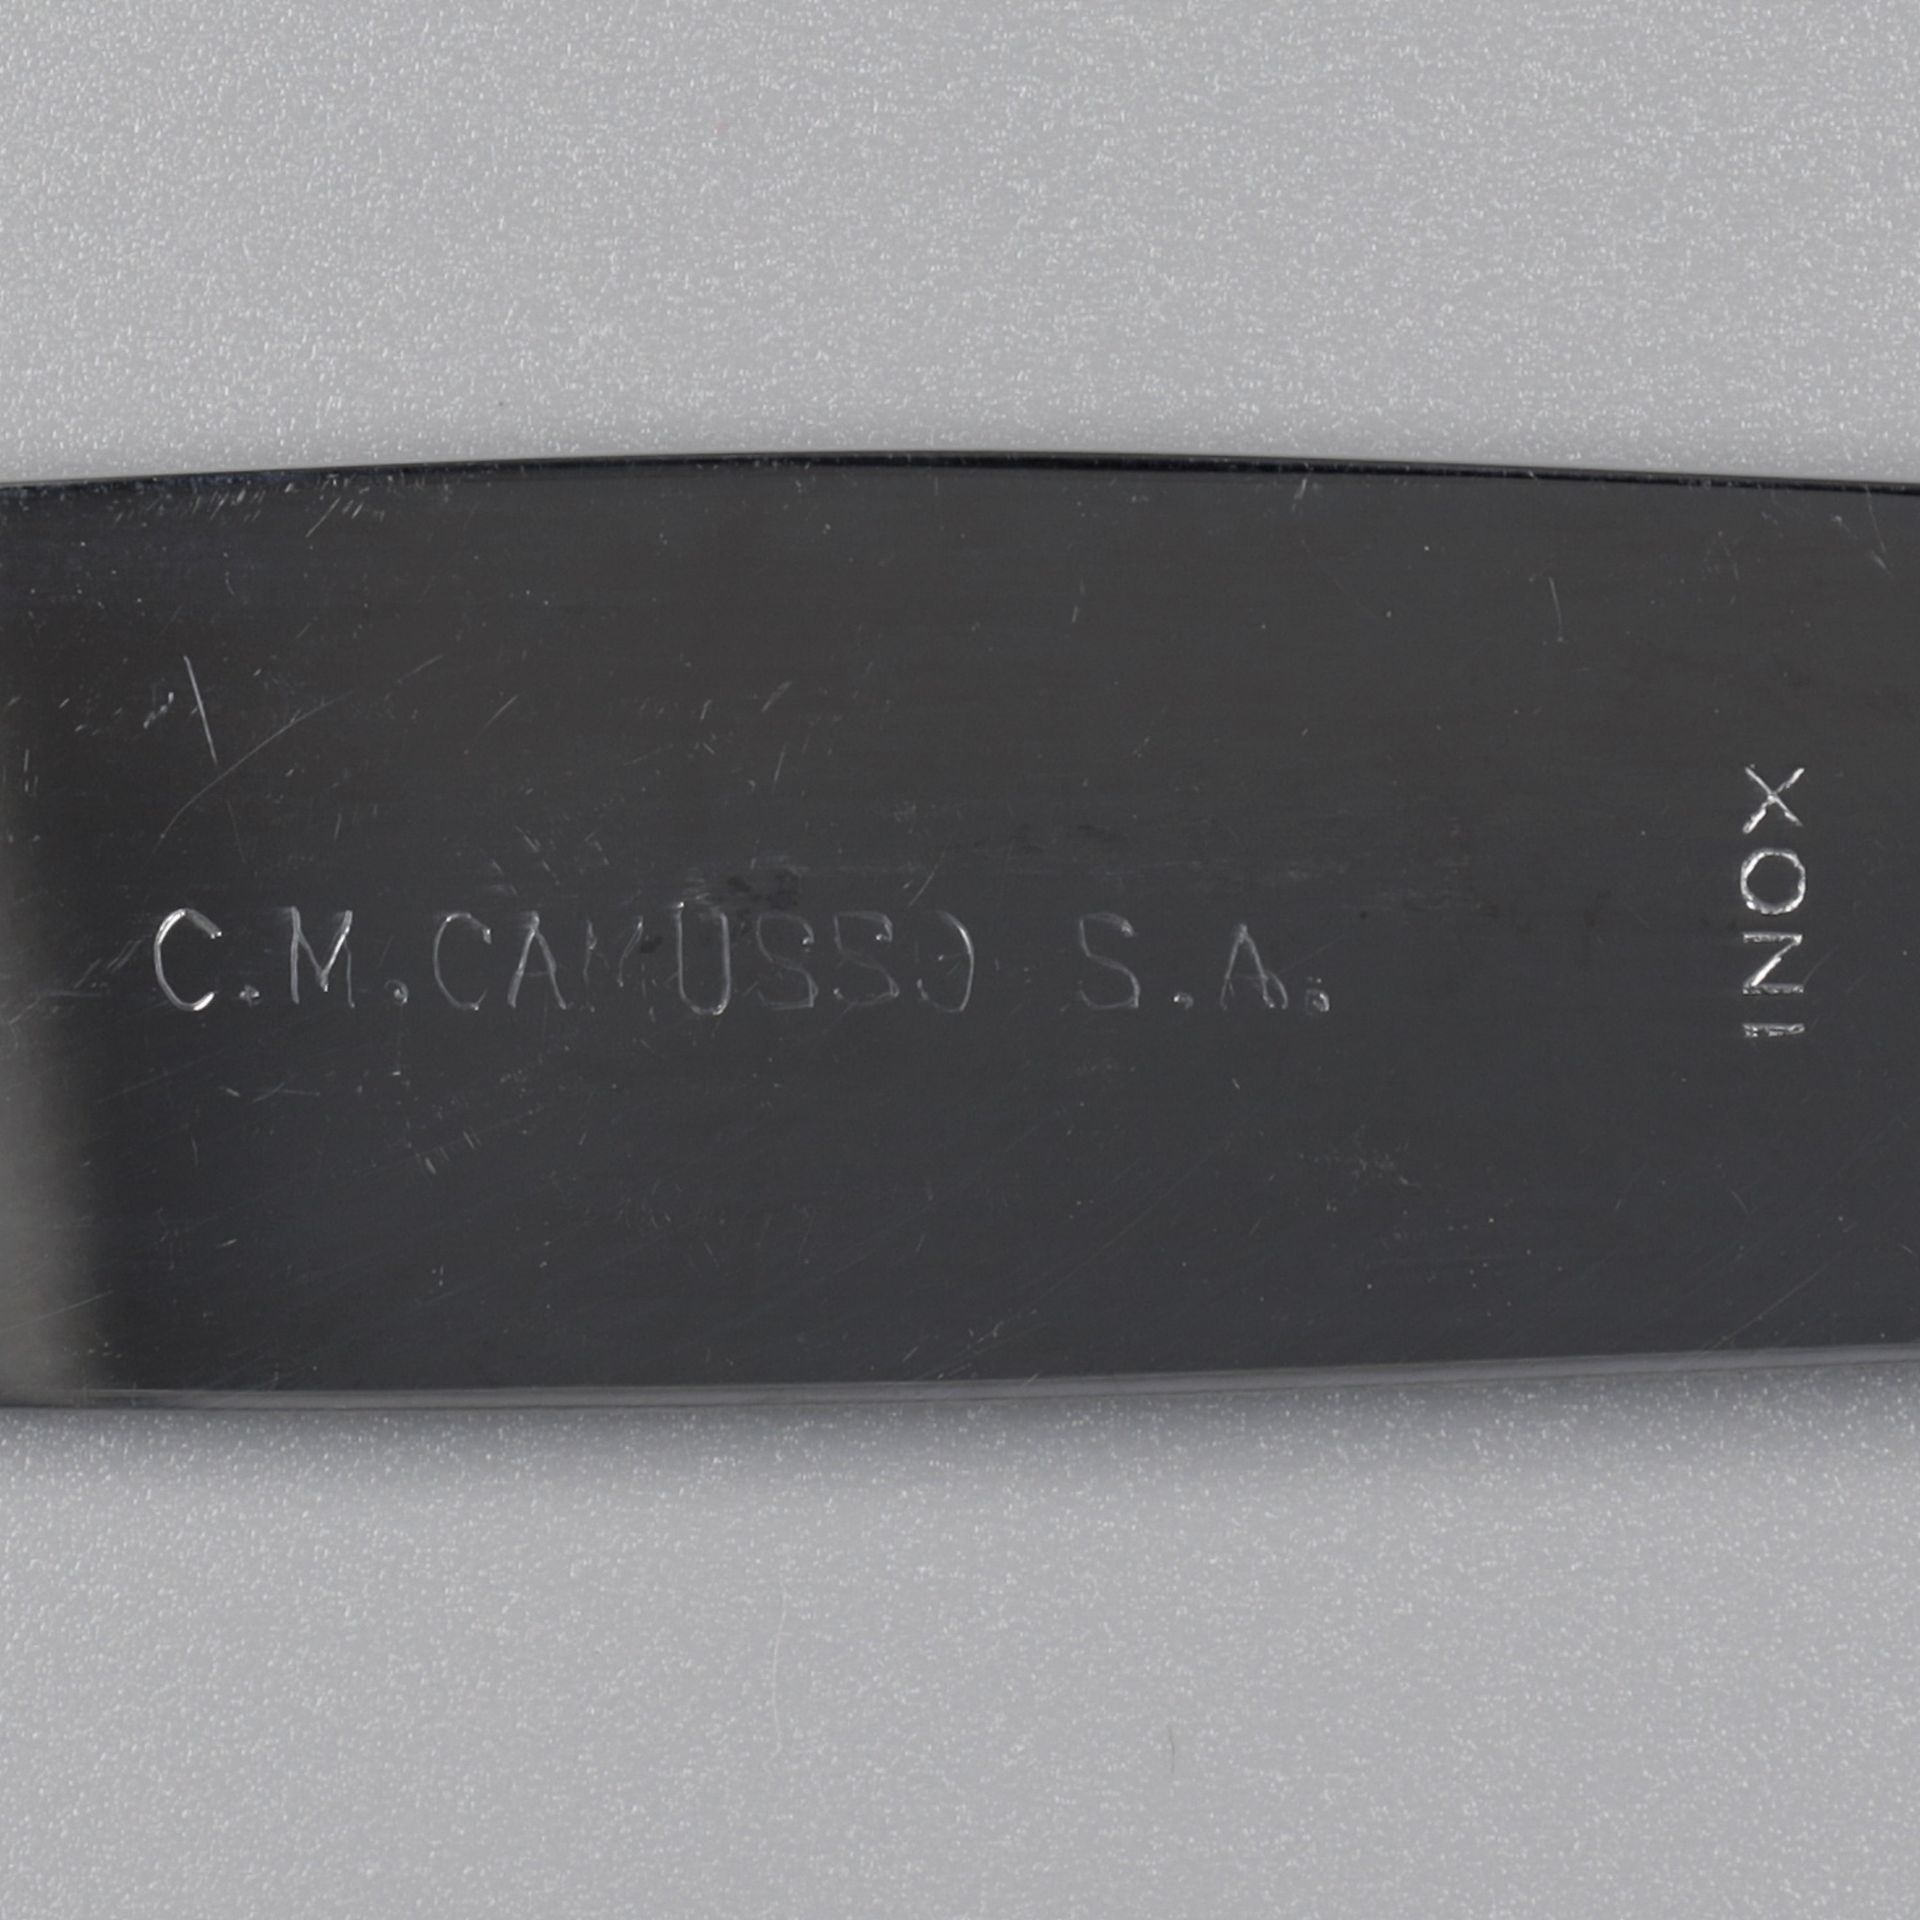 No reserve - 6-piece set of dinner knives, model Grand Paris, silver. - Image 6 of 6